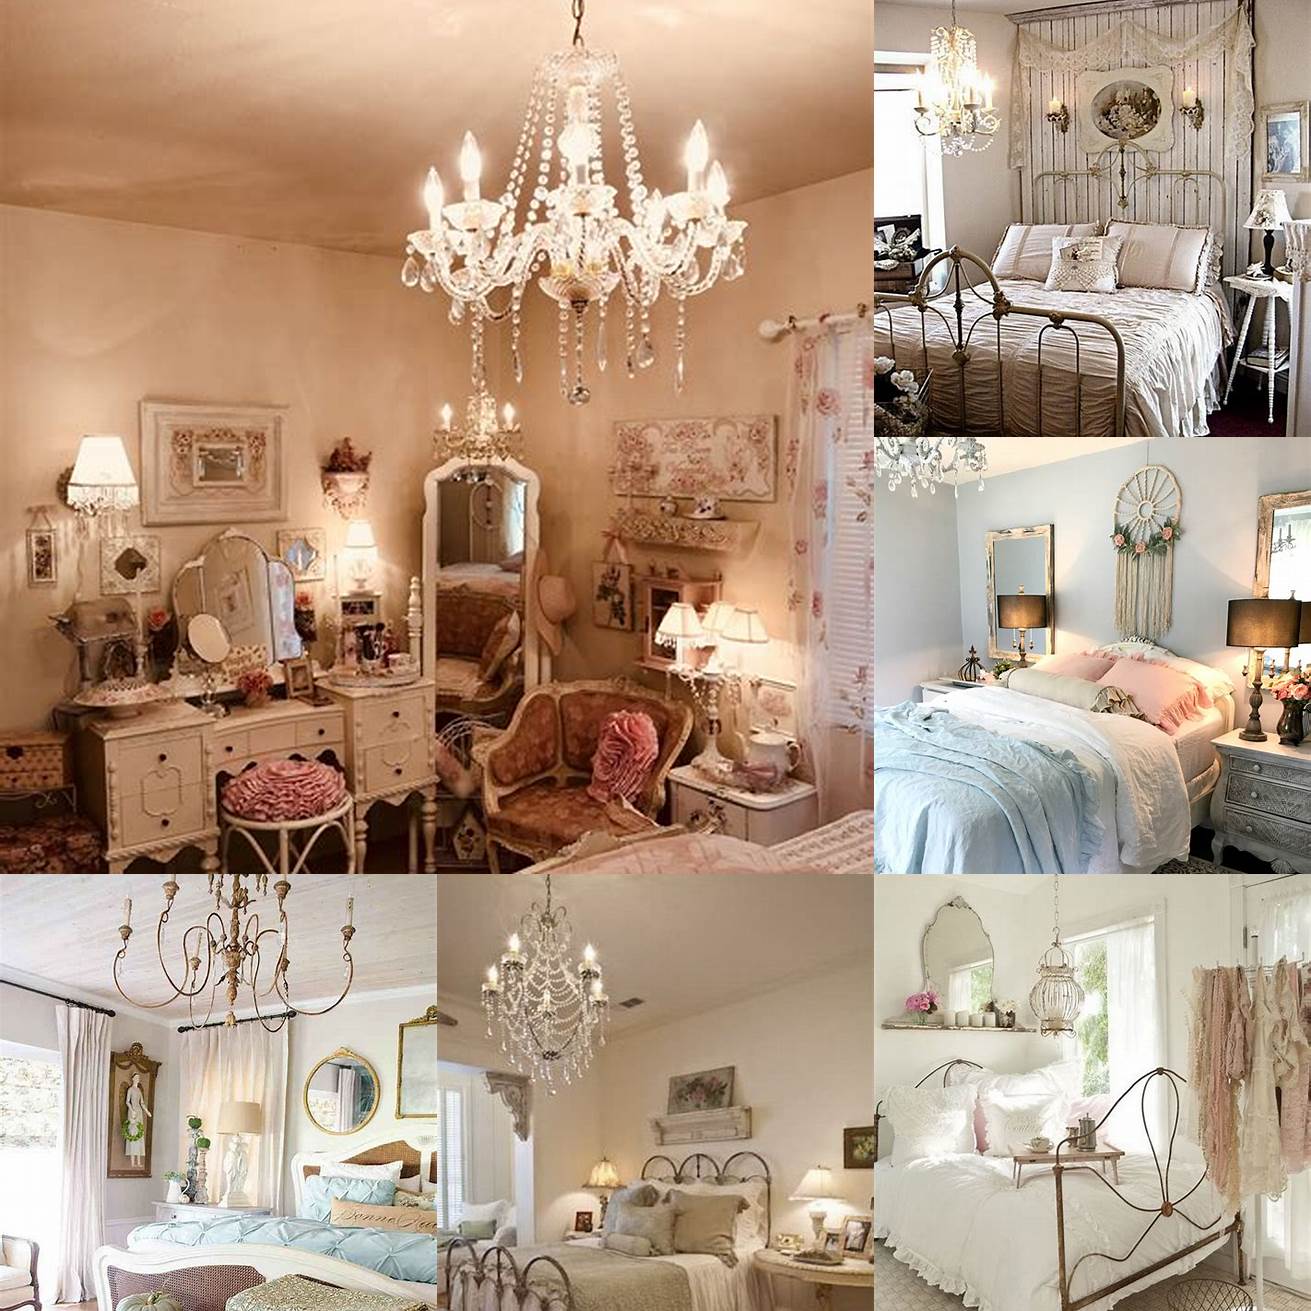 A vintage chandelier adds a touch of glamour to this Shabby Chic bedroom design